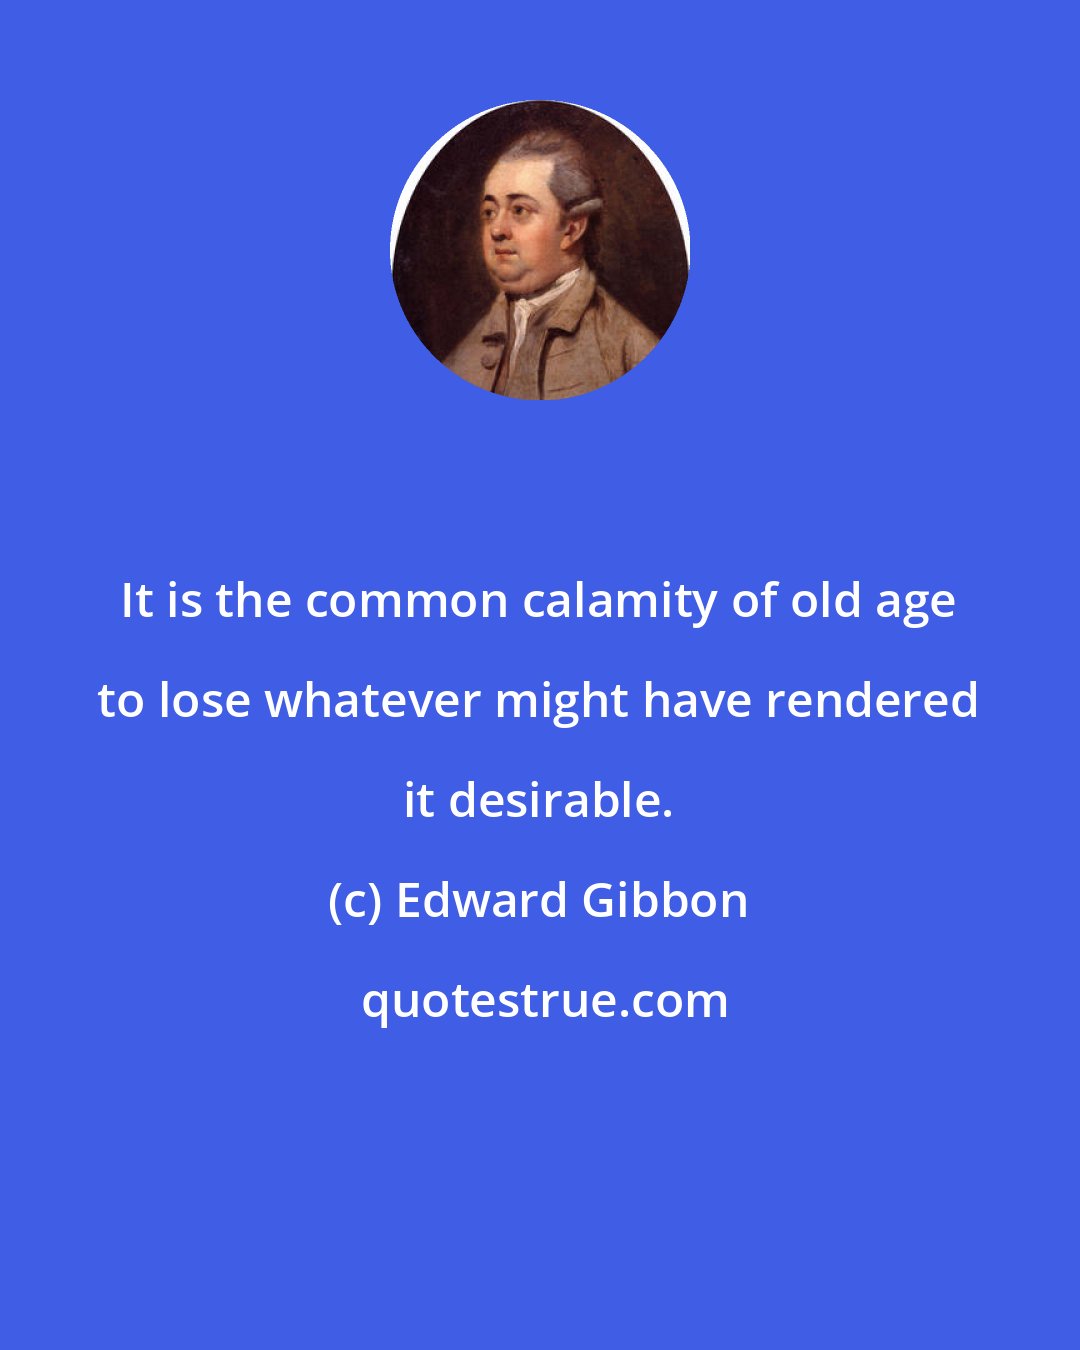 Edward Gibbon: It is the common calamity of old age to lose whatever might have rendered it desirable.